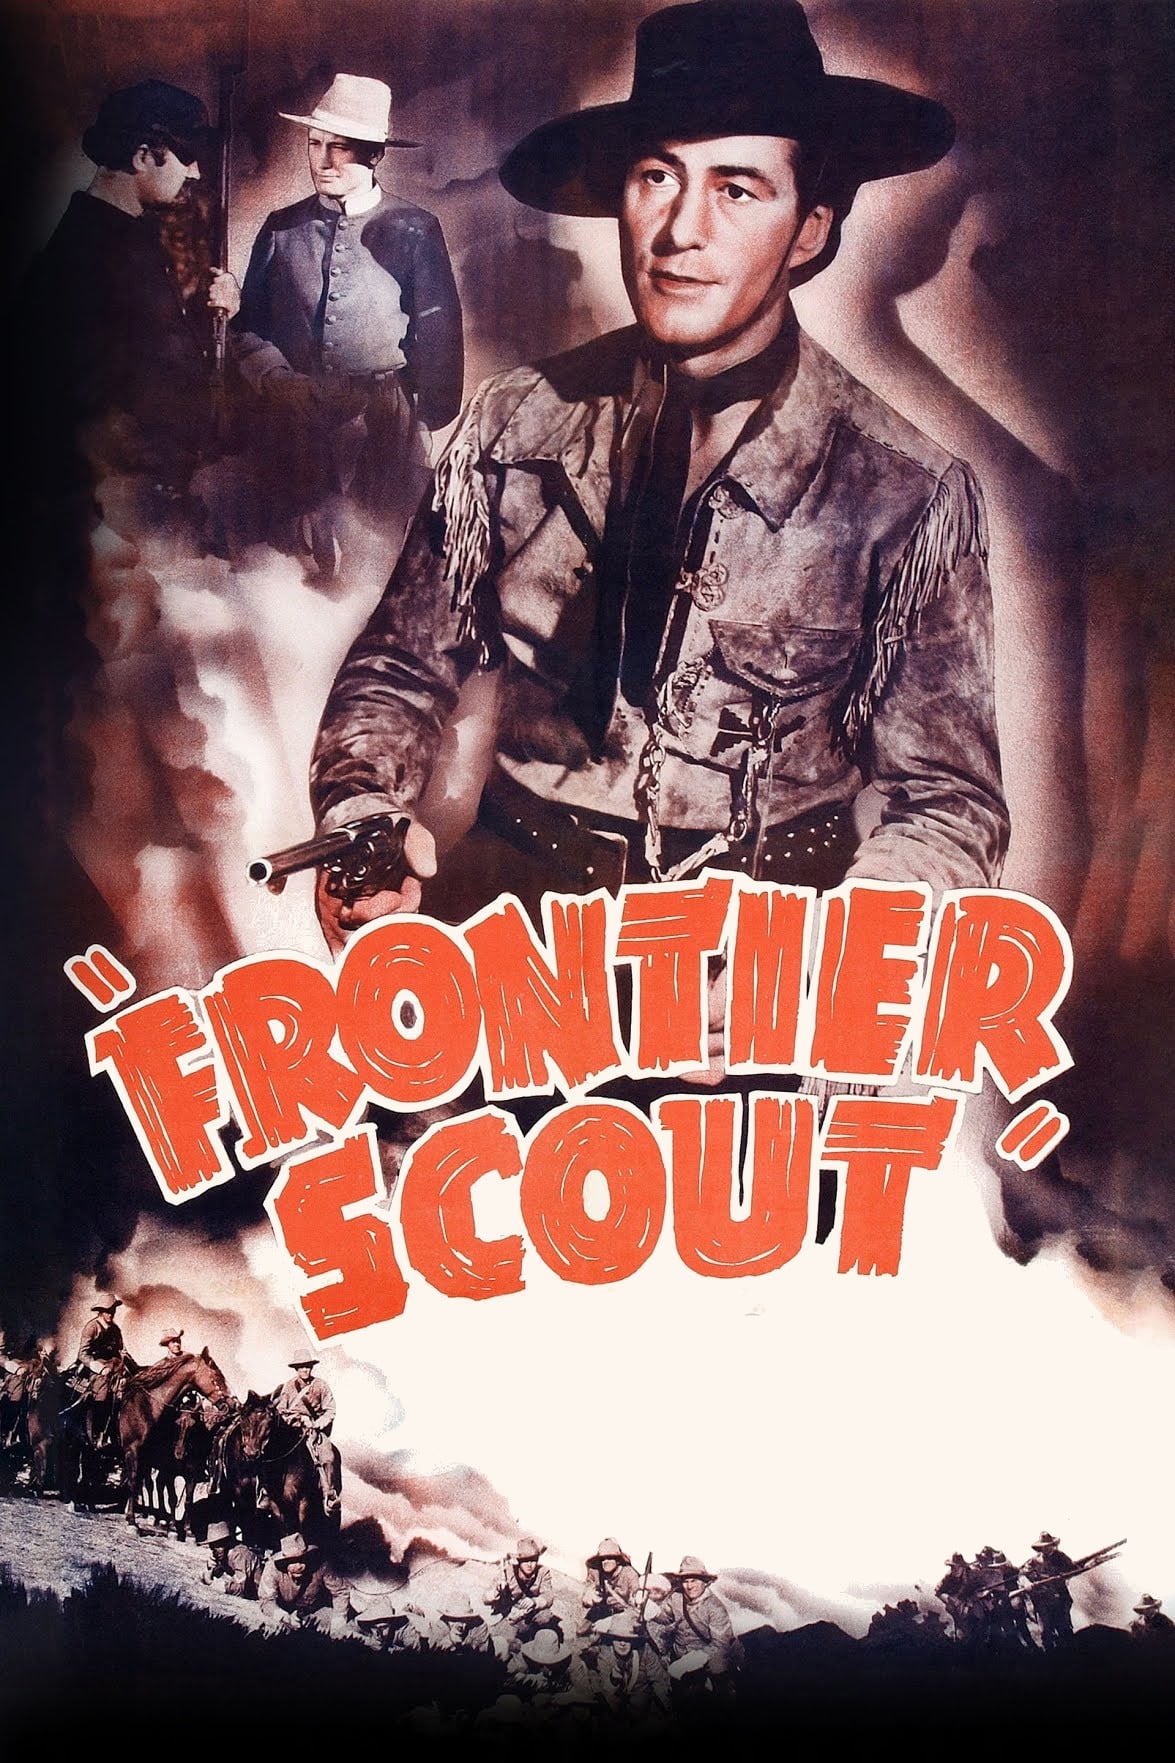 Frontier Scout (1938)